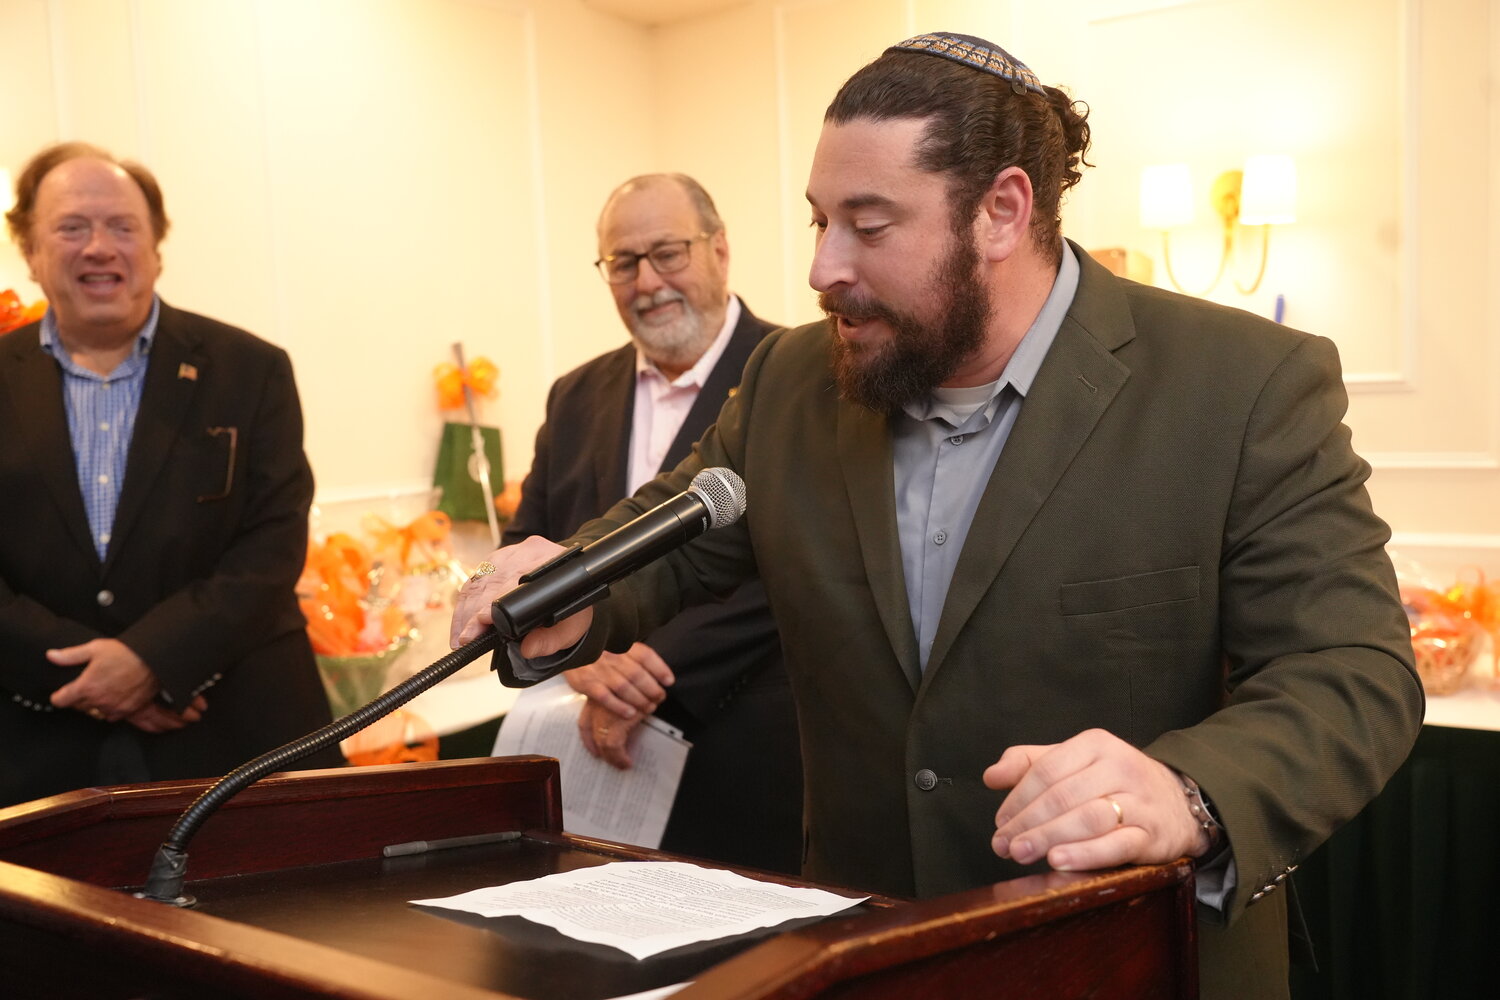 Rabbi Michael Cohen of Central Synagogue-Beth Emeth delivers an invocation during the dinner presentation.